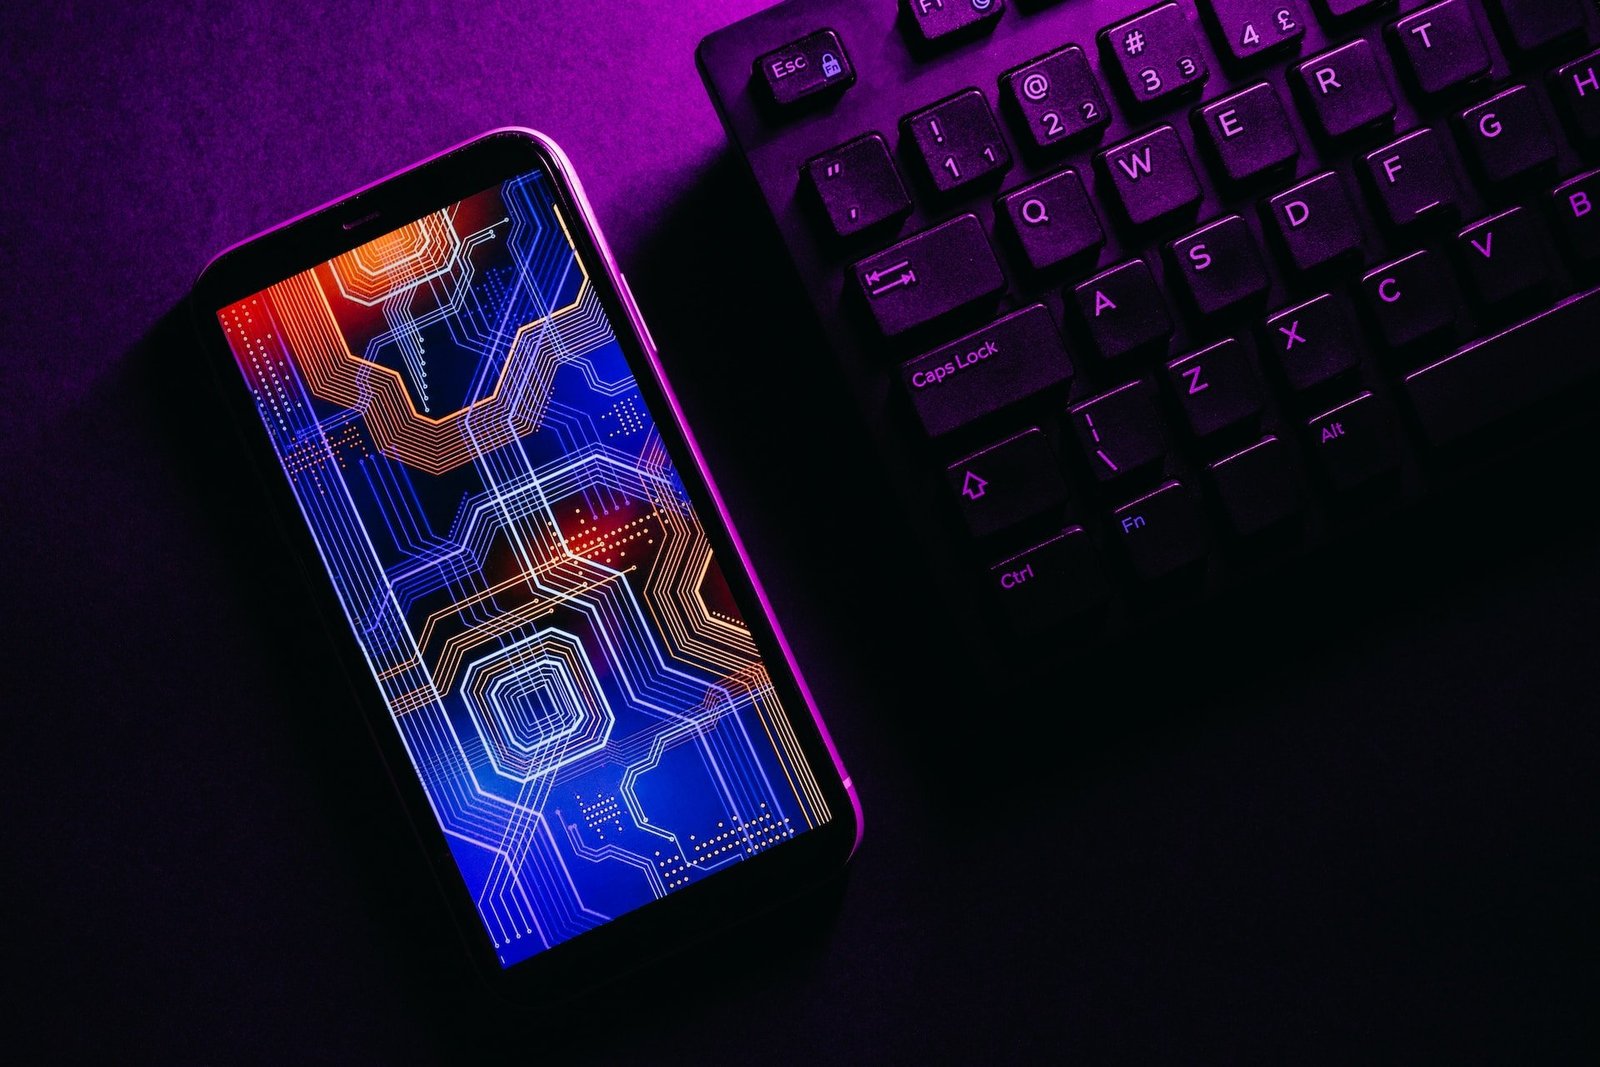 Futuristic photo of a smartphone with a colorful and techy homescreen